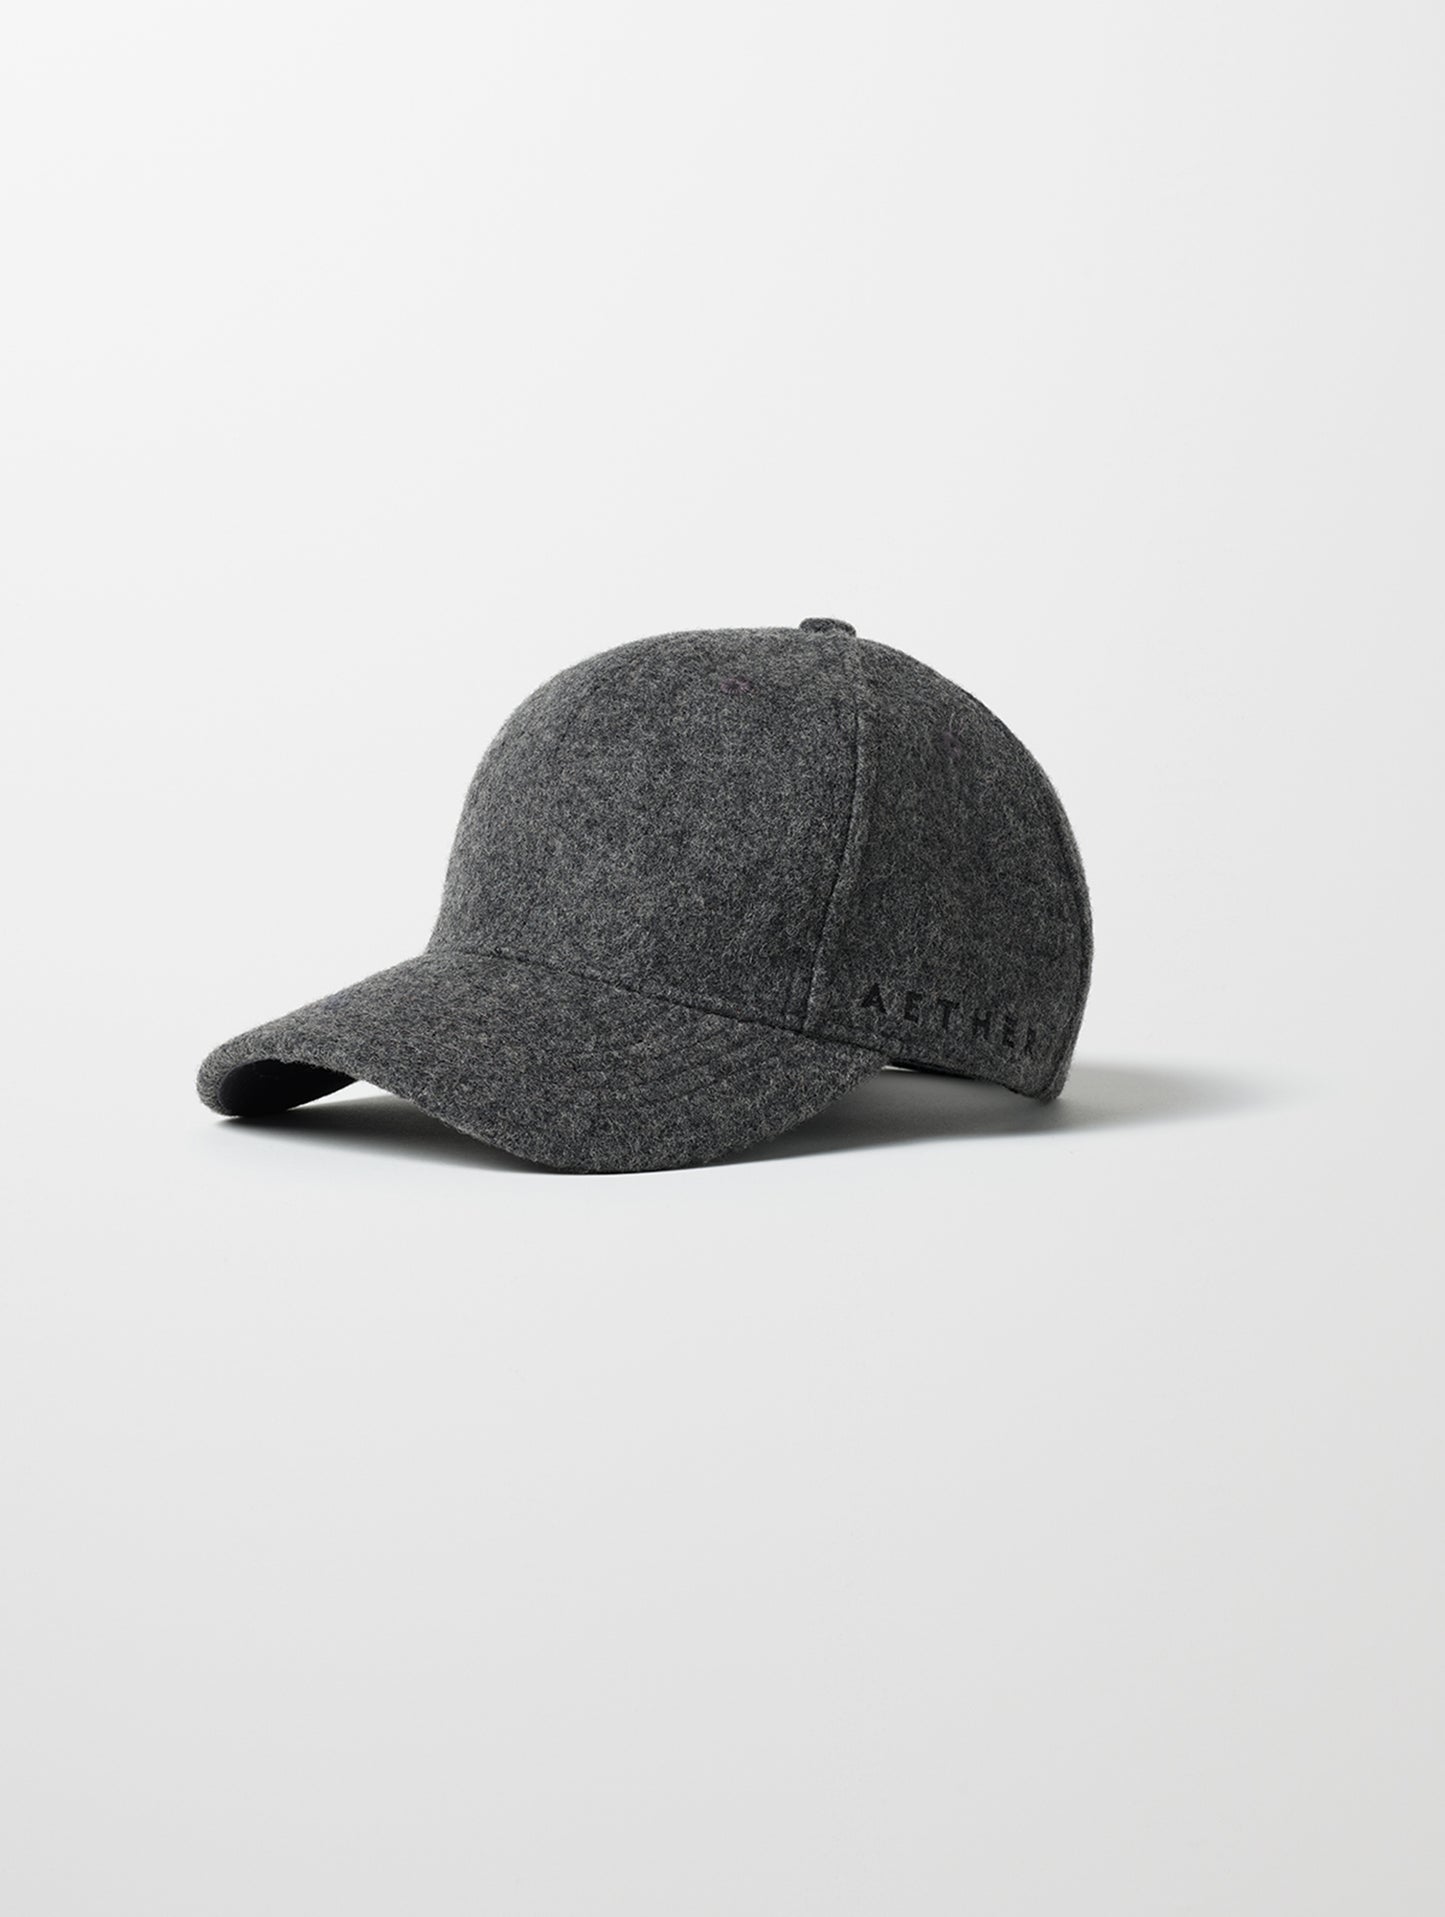 Grey wool hat from AETHER Apparel